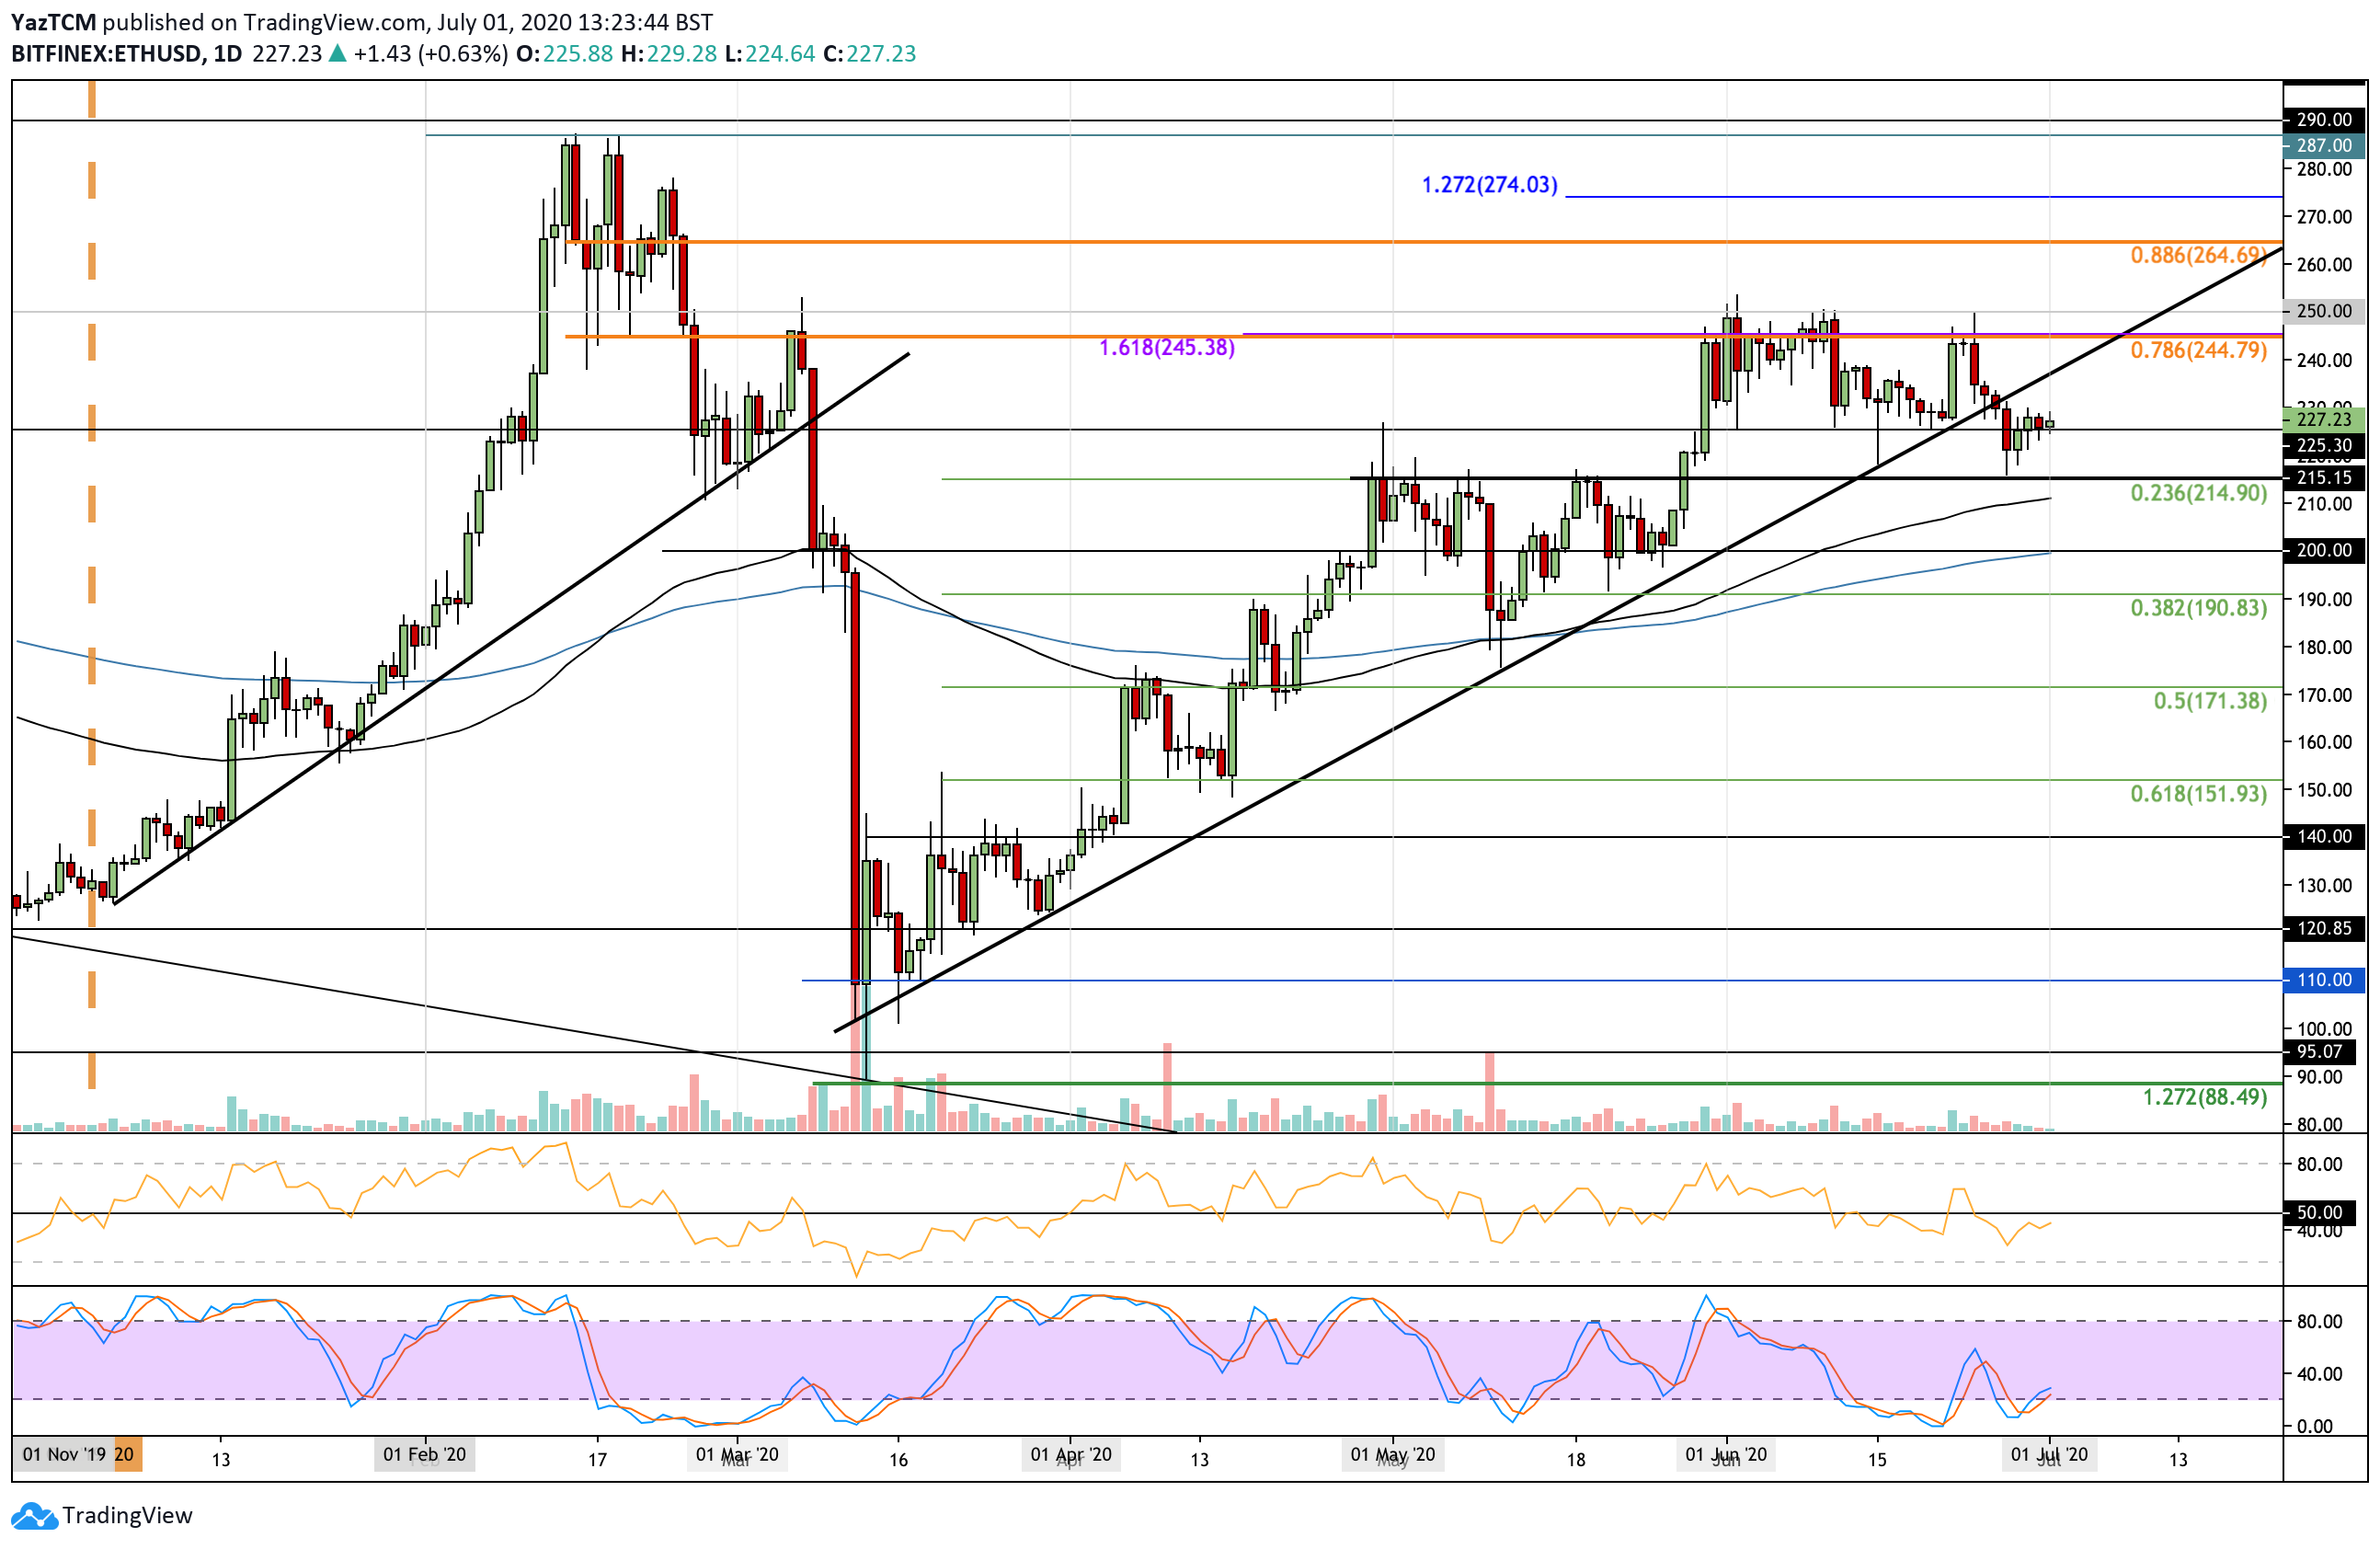 Ethereum Price Analysis: ETH Bulls Defending $225 And Looking For a Rebound